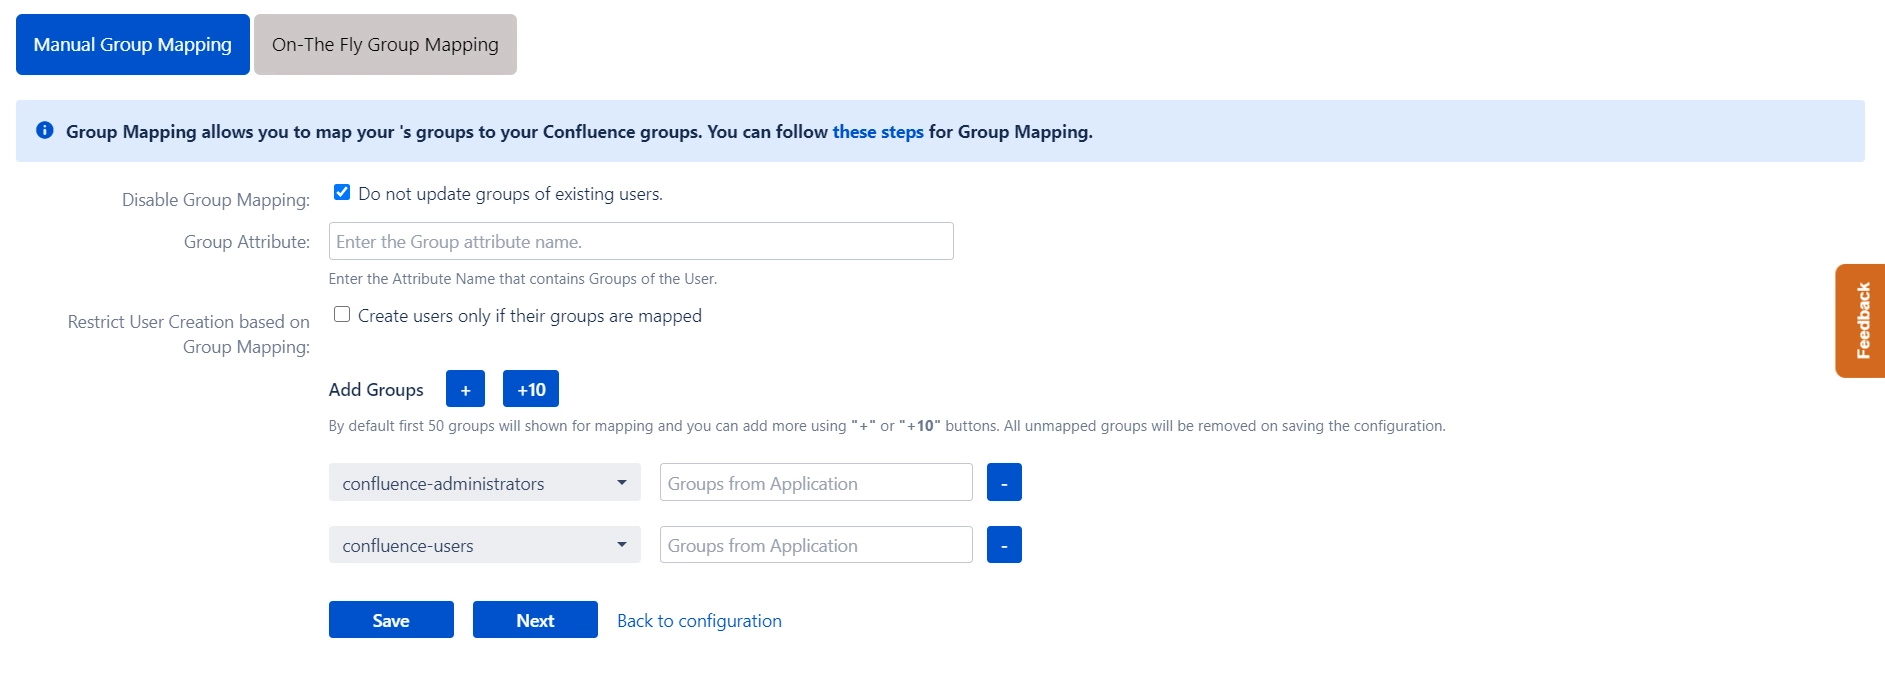 OAuth / OpenID Single Sign On (SSO) into Confluence, Manual group mapping